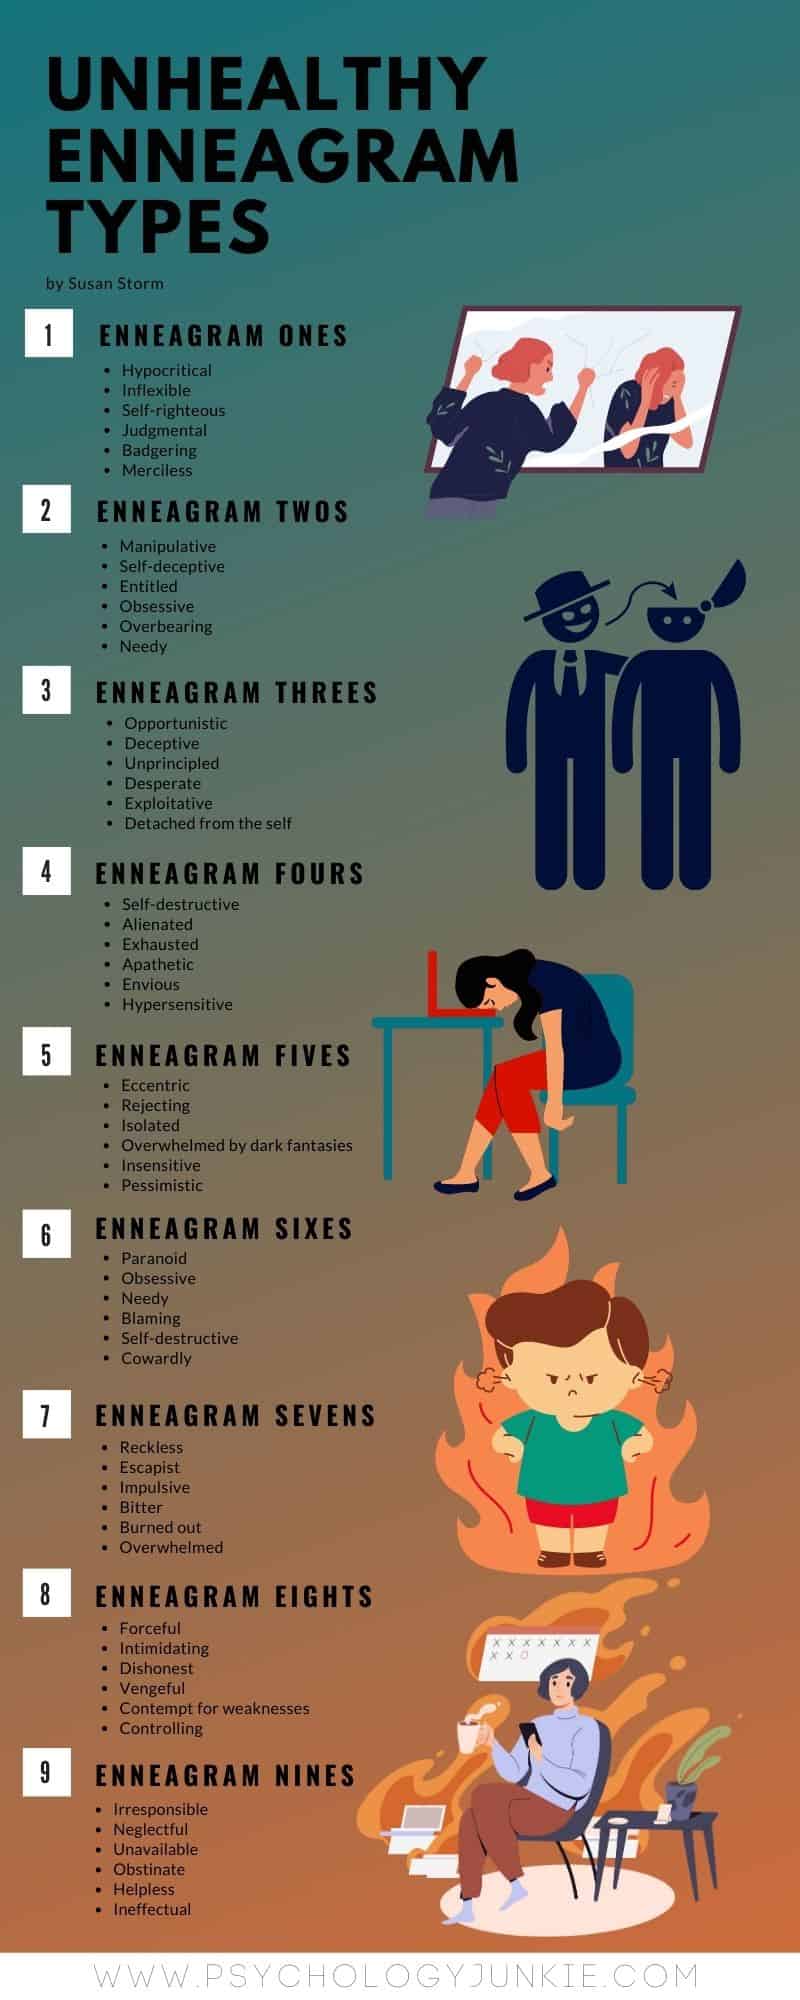 A description of the unhealthy Enneagram types at their worst. #Enneagram #Personality